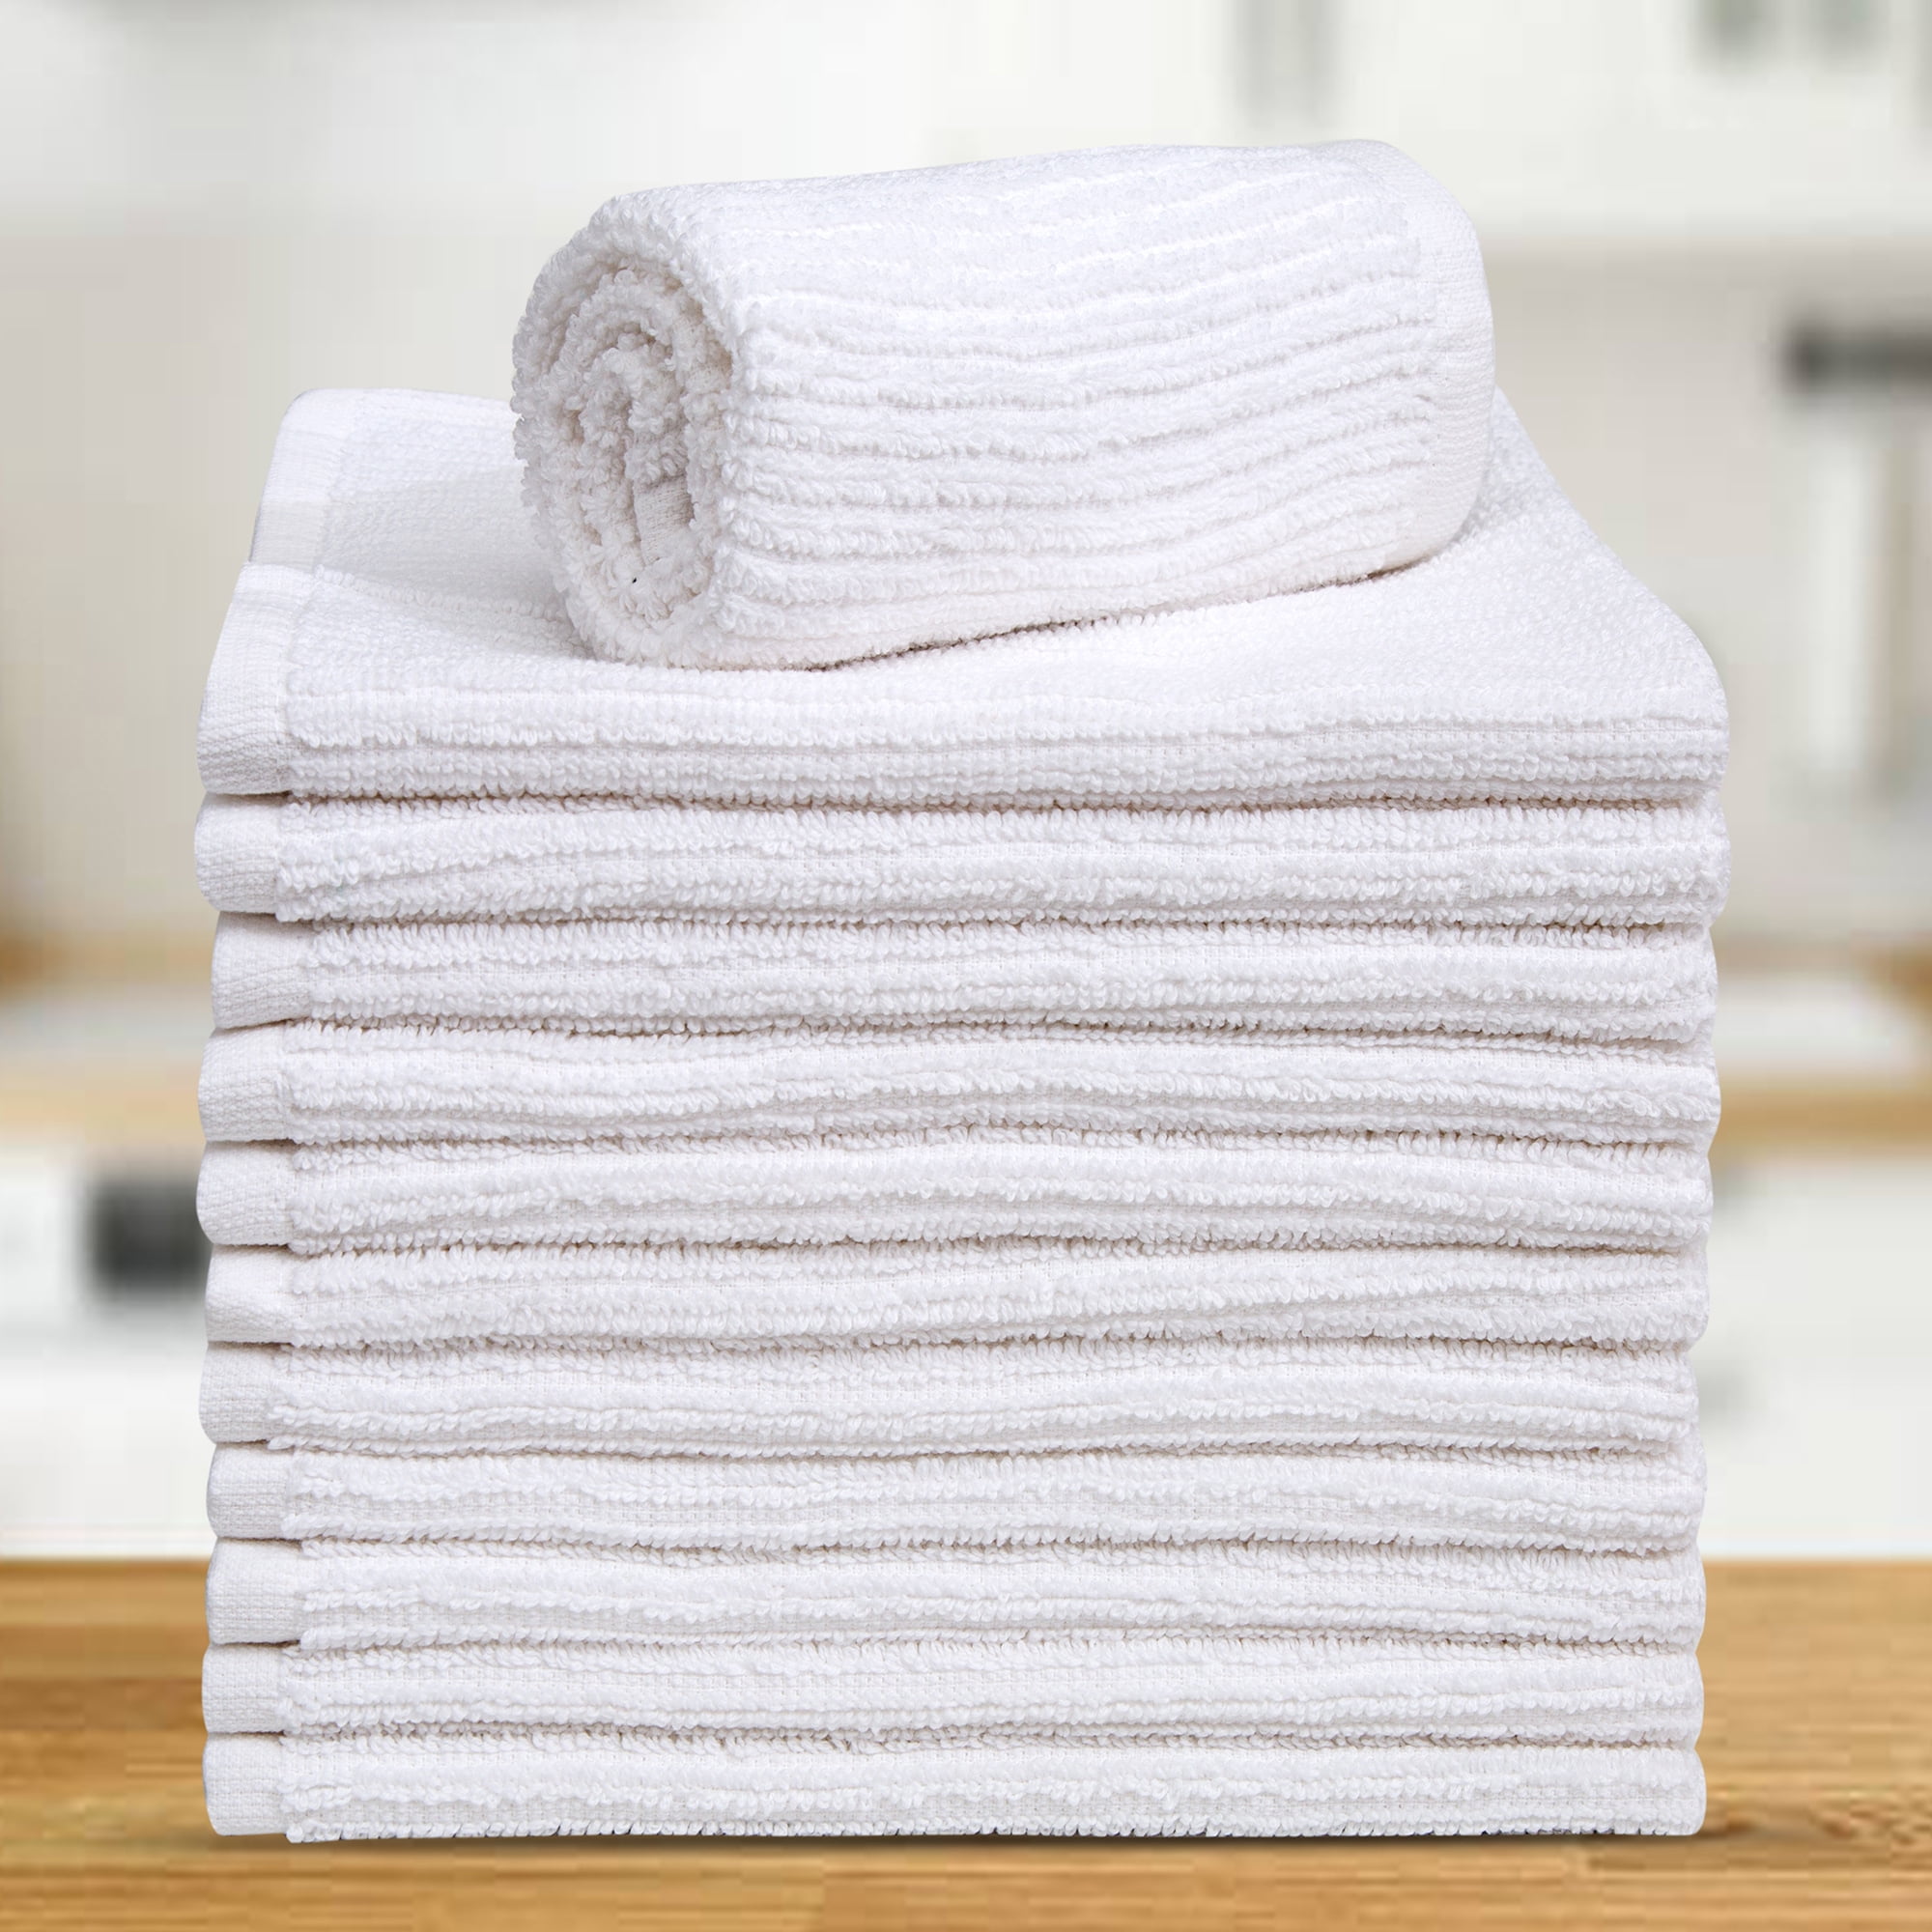 Kitchen Towels, 100% Cotton, Absorbent Rags for Cleaning Counter Top, Hand  Drying Dishes - Thick, Soft, Durable, Reusable, Dry Barmops 16” x 19”